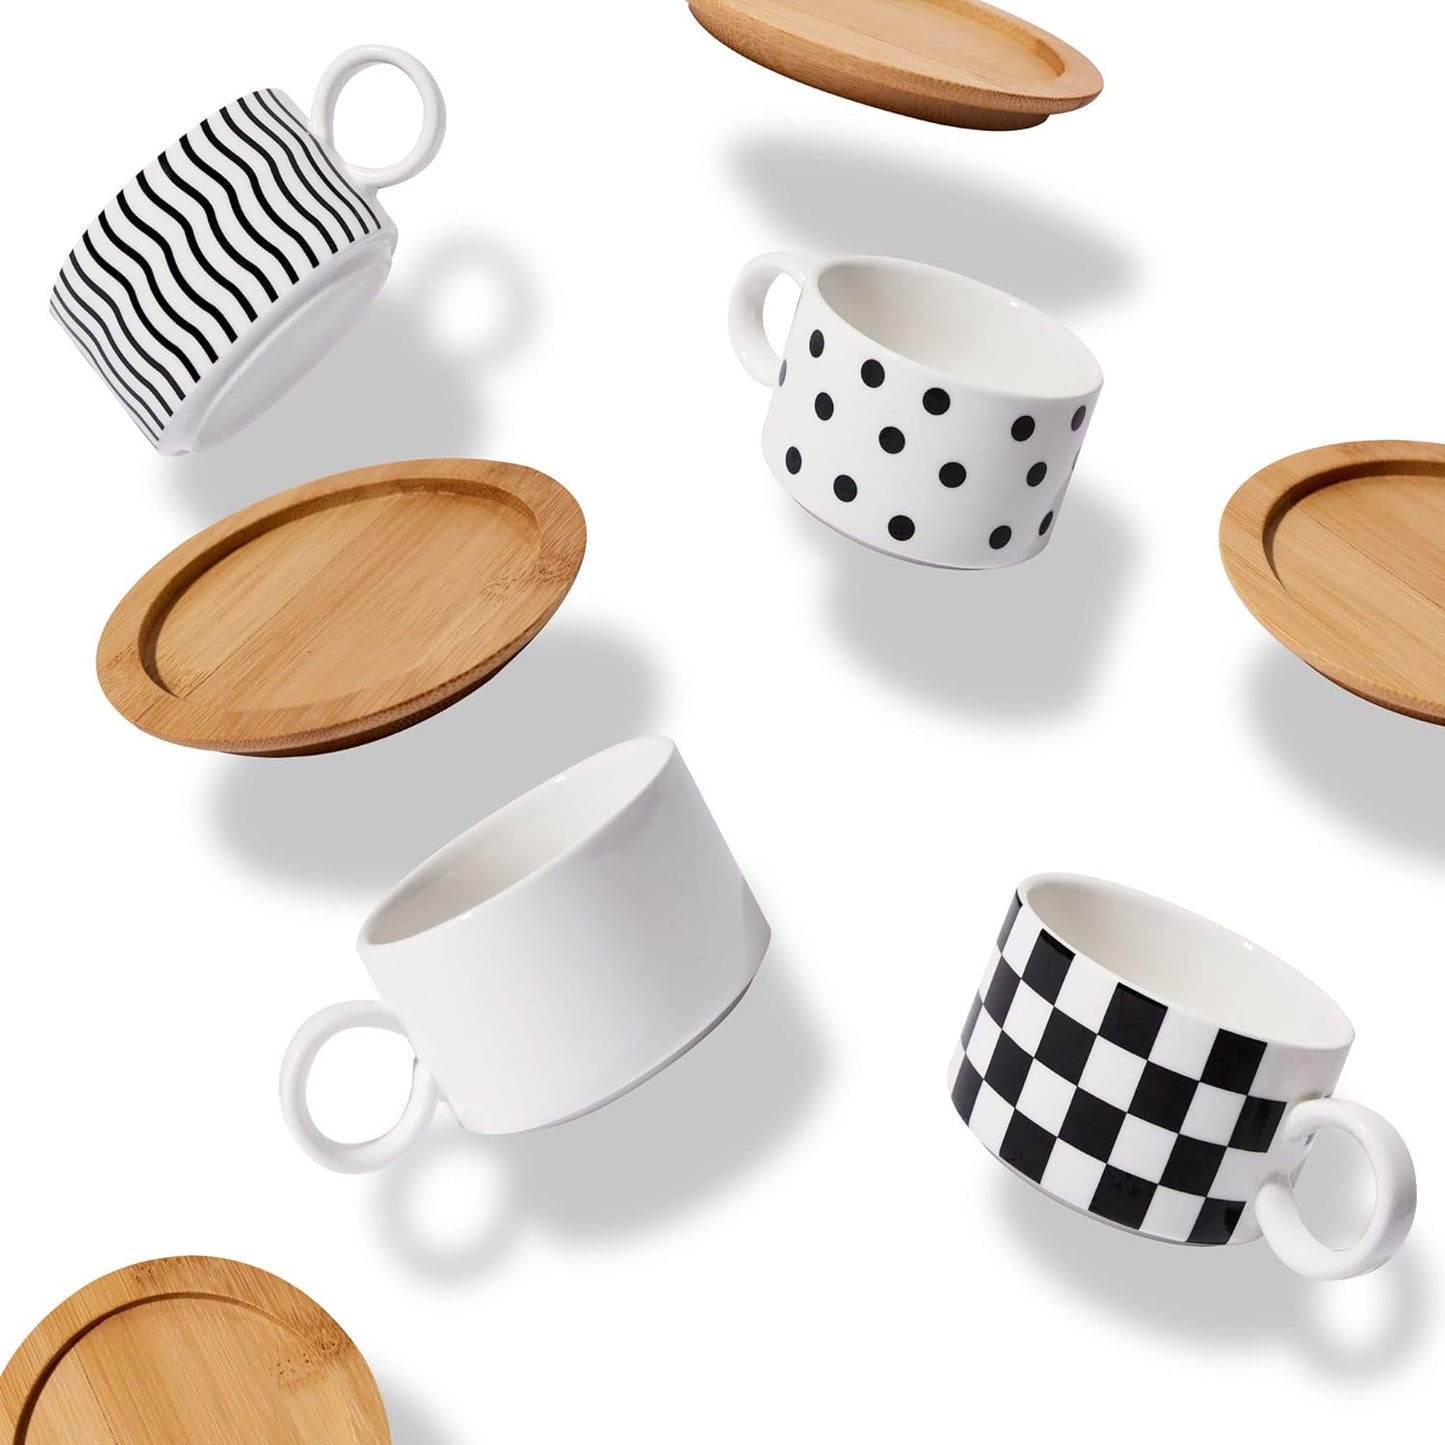 Stackable Espresso Cups Set of 4 - Espresso Mugs with Wooden Saucers, Metal Stand - Durable Porcelain Espresso Cup - Easy To Clean, Dishwasher-Safe - Modern Coffee, Latte, Tea Mug Set - 6 Oz